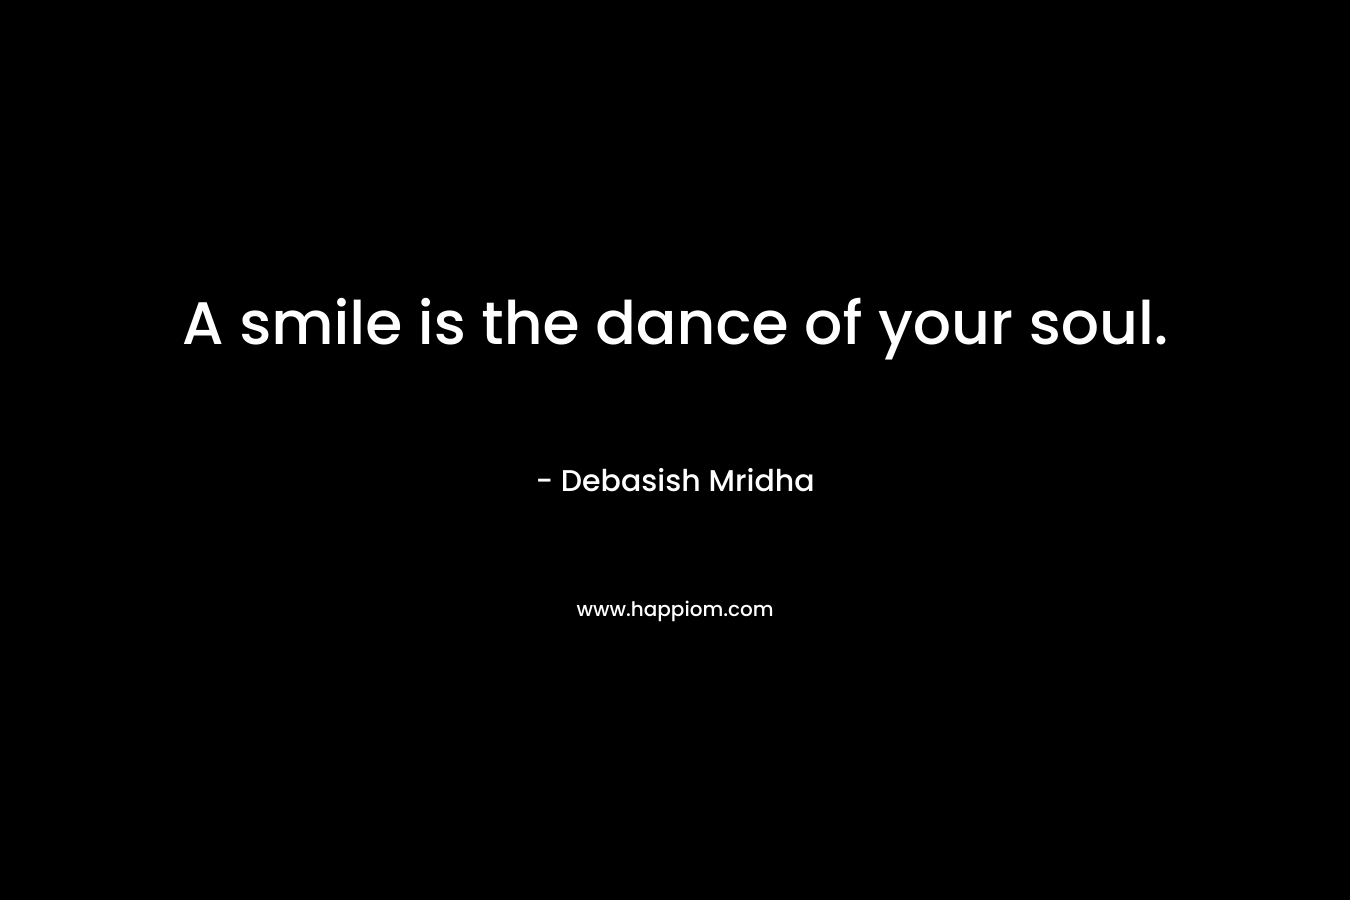 A smile is the dance of your soul.